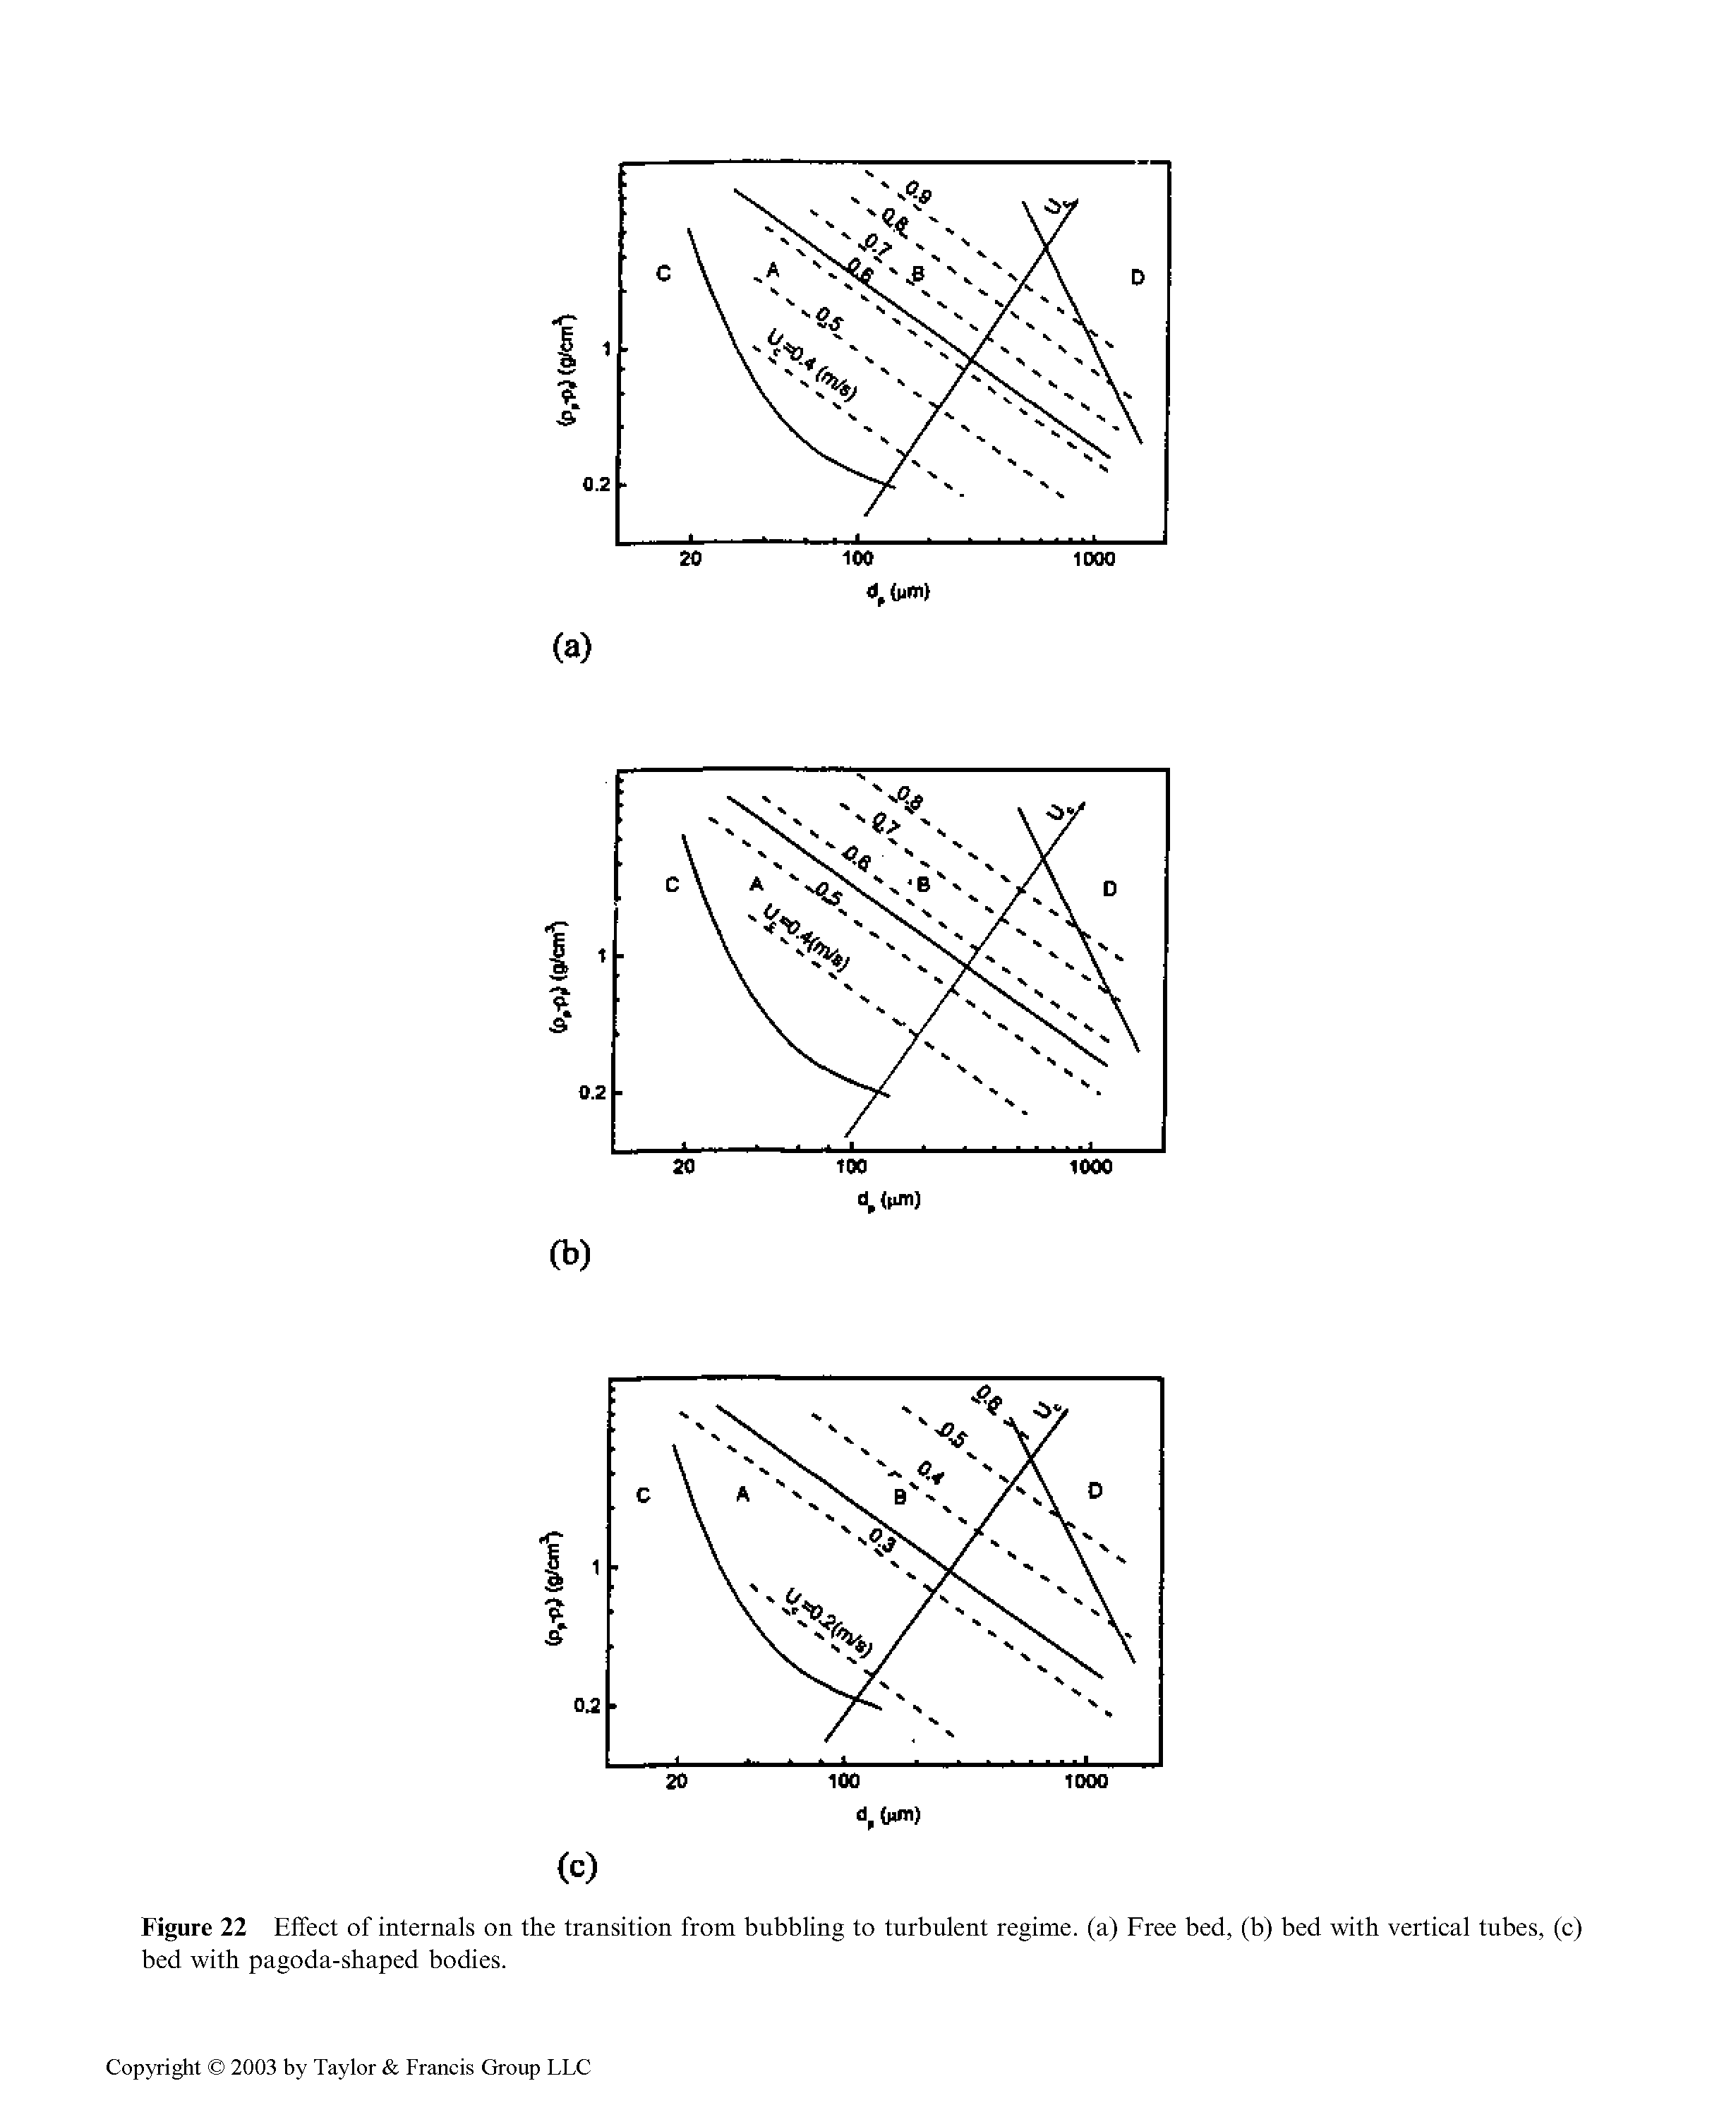 Figure 22 Effect of internals on the transition from bubbling to turbulent regime, (a) Free bed, (b) bed with vertical tubes, (c) bed with pagoda-shaped bodies.